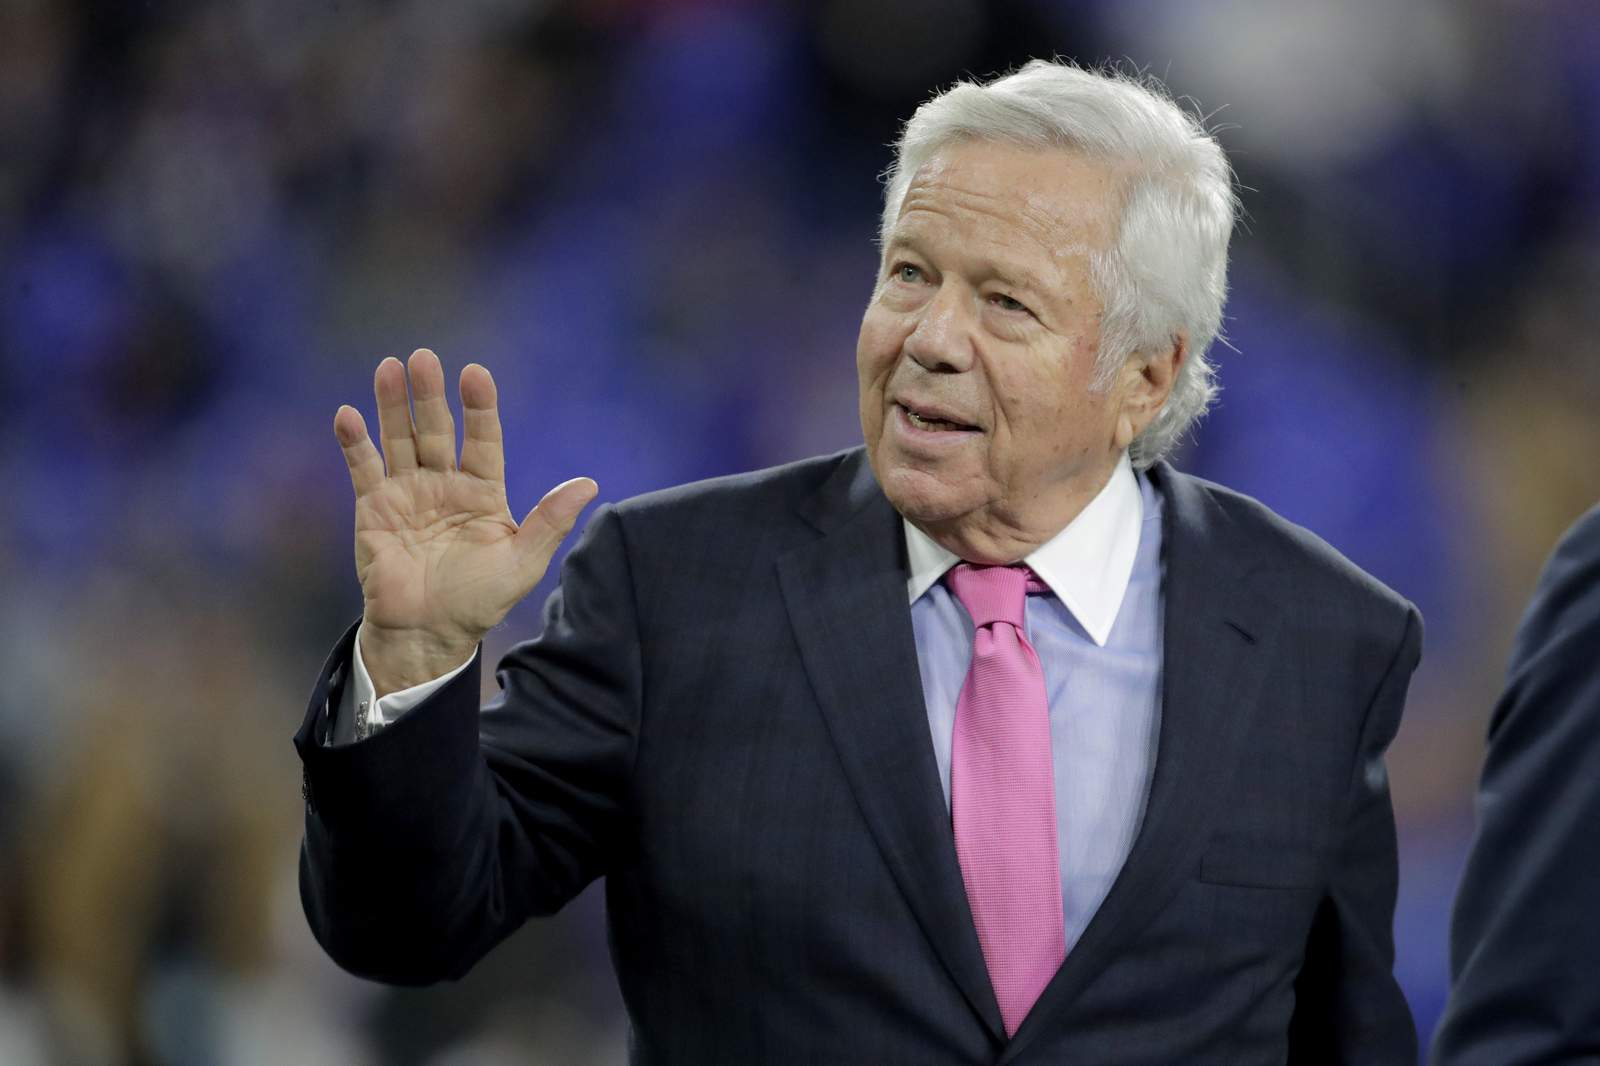 Patriots owner's prostitution case heads to appellate court